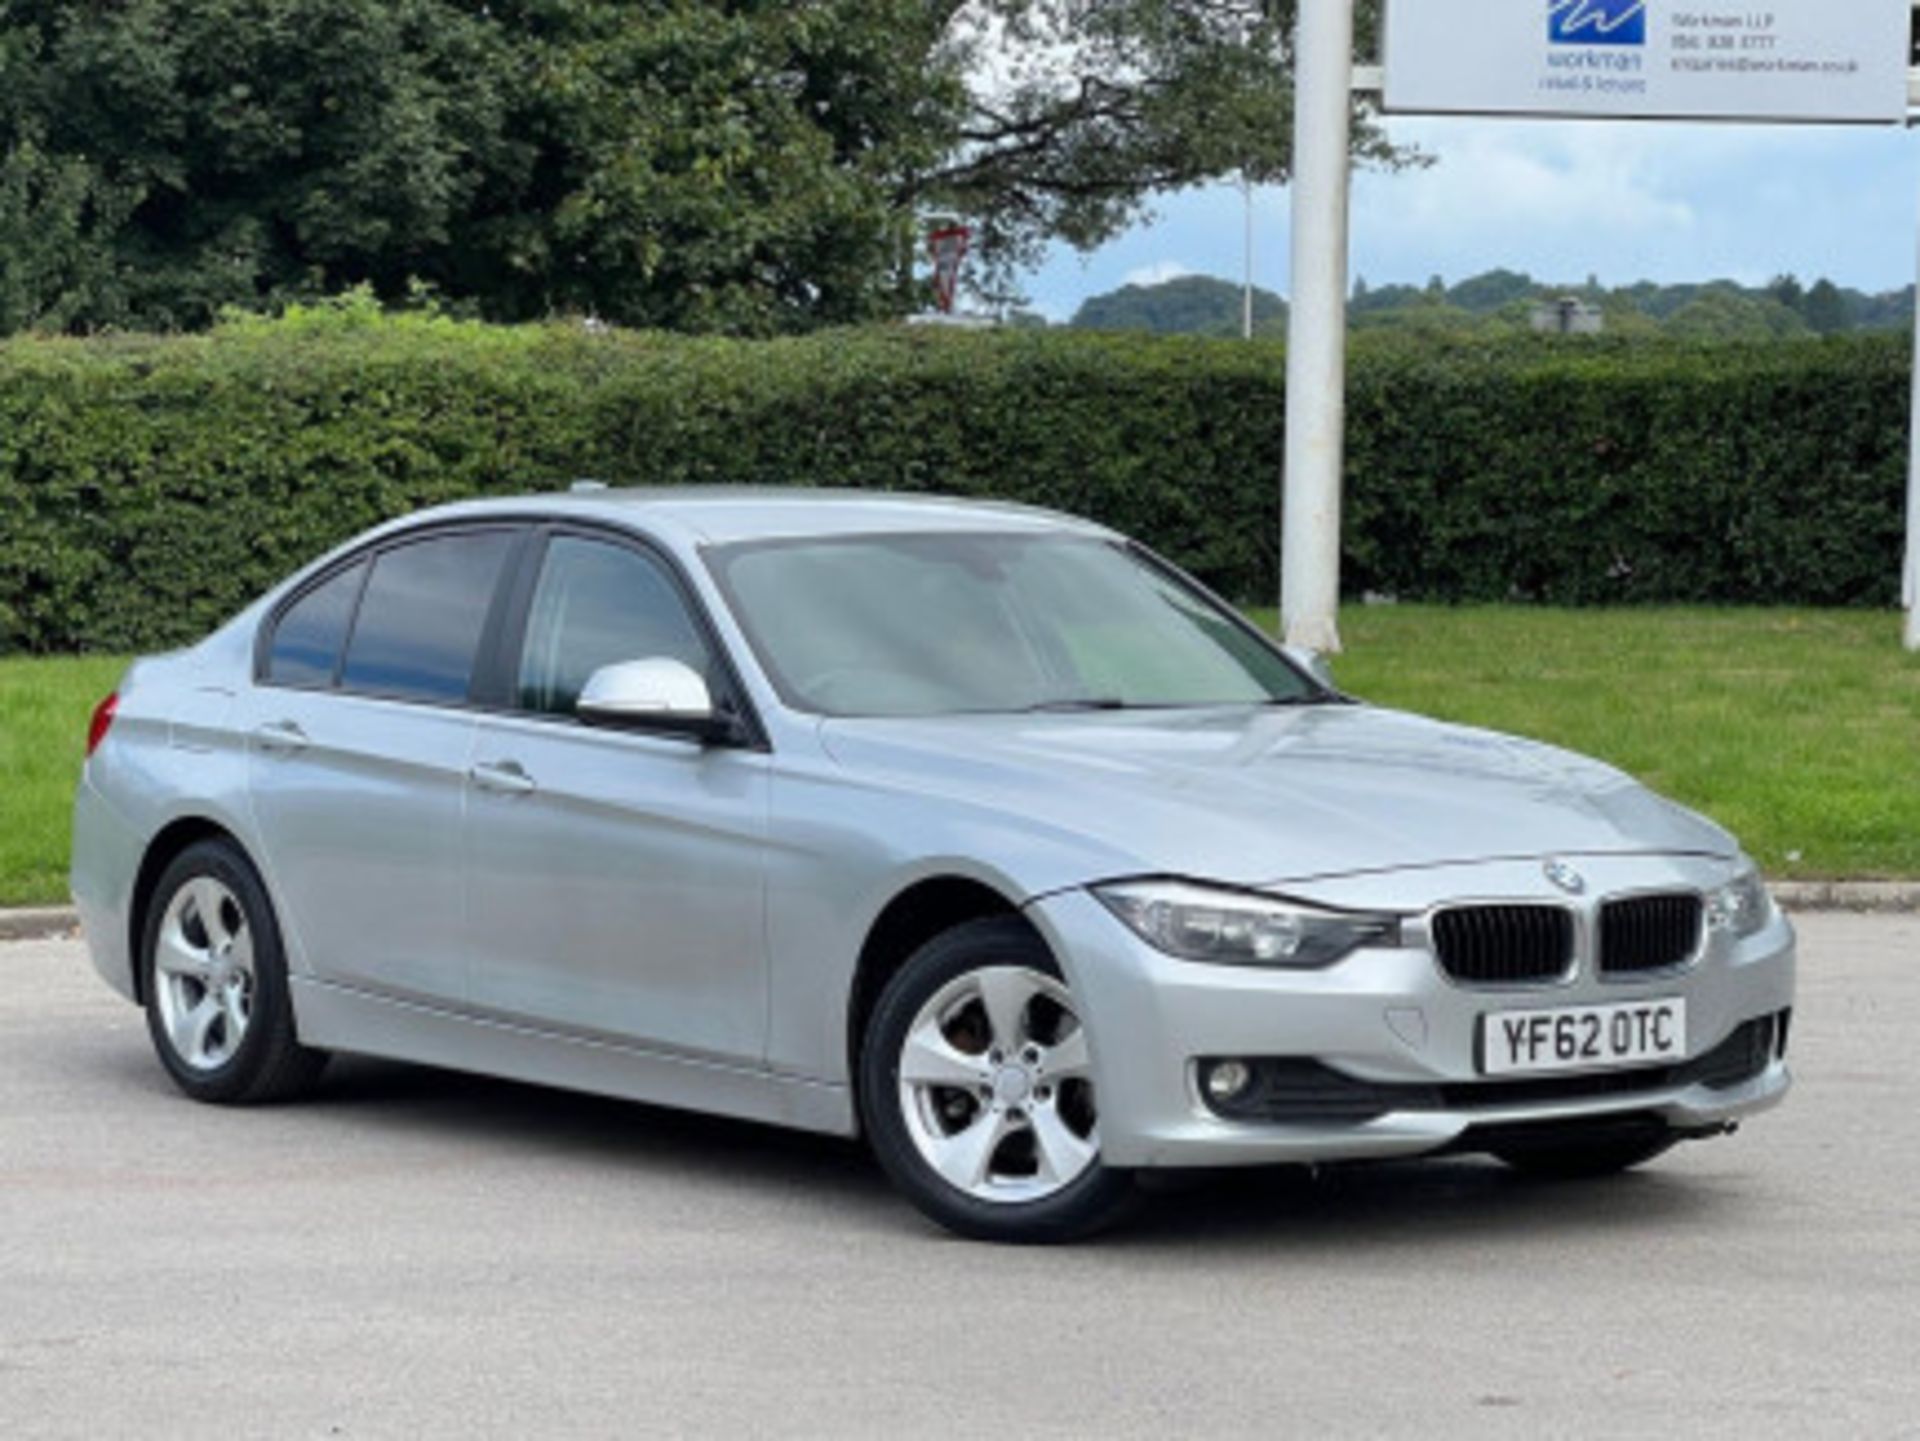 BMW 3 SERIES 2.0 DIESEL ED START STOP - A WELL-MAINTAINED GEM >>--NO VAT ON HAMMER--<< - Image 127 of 229